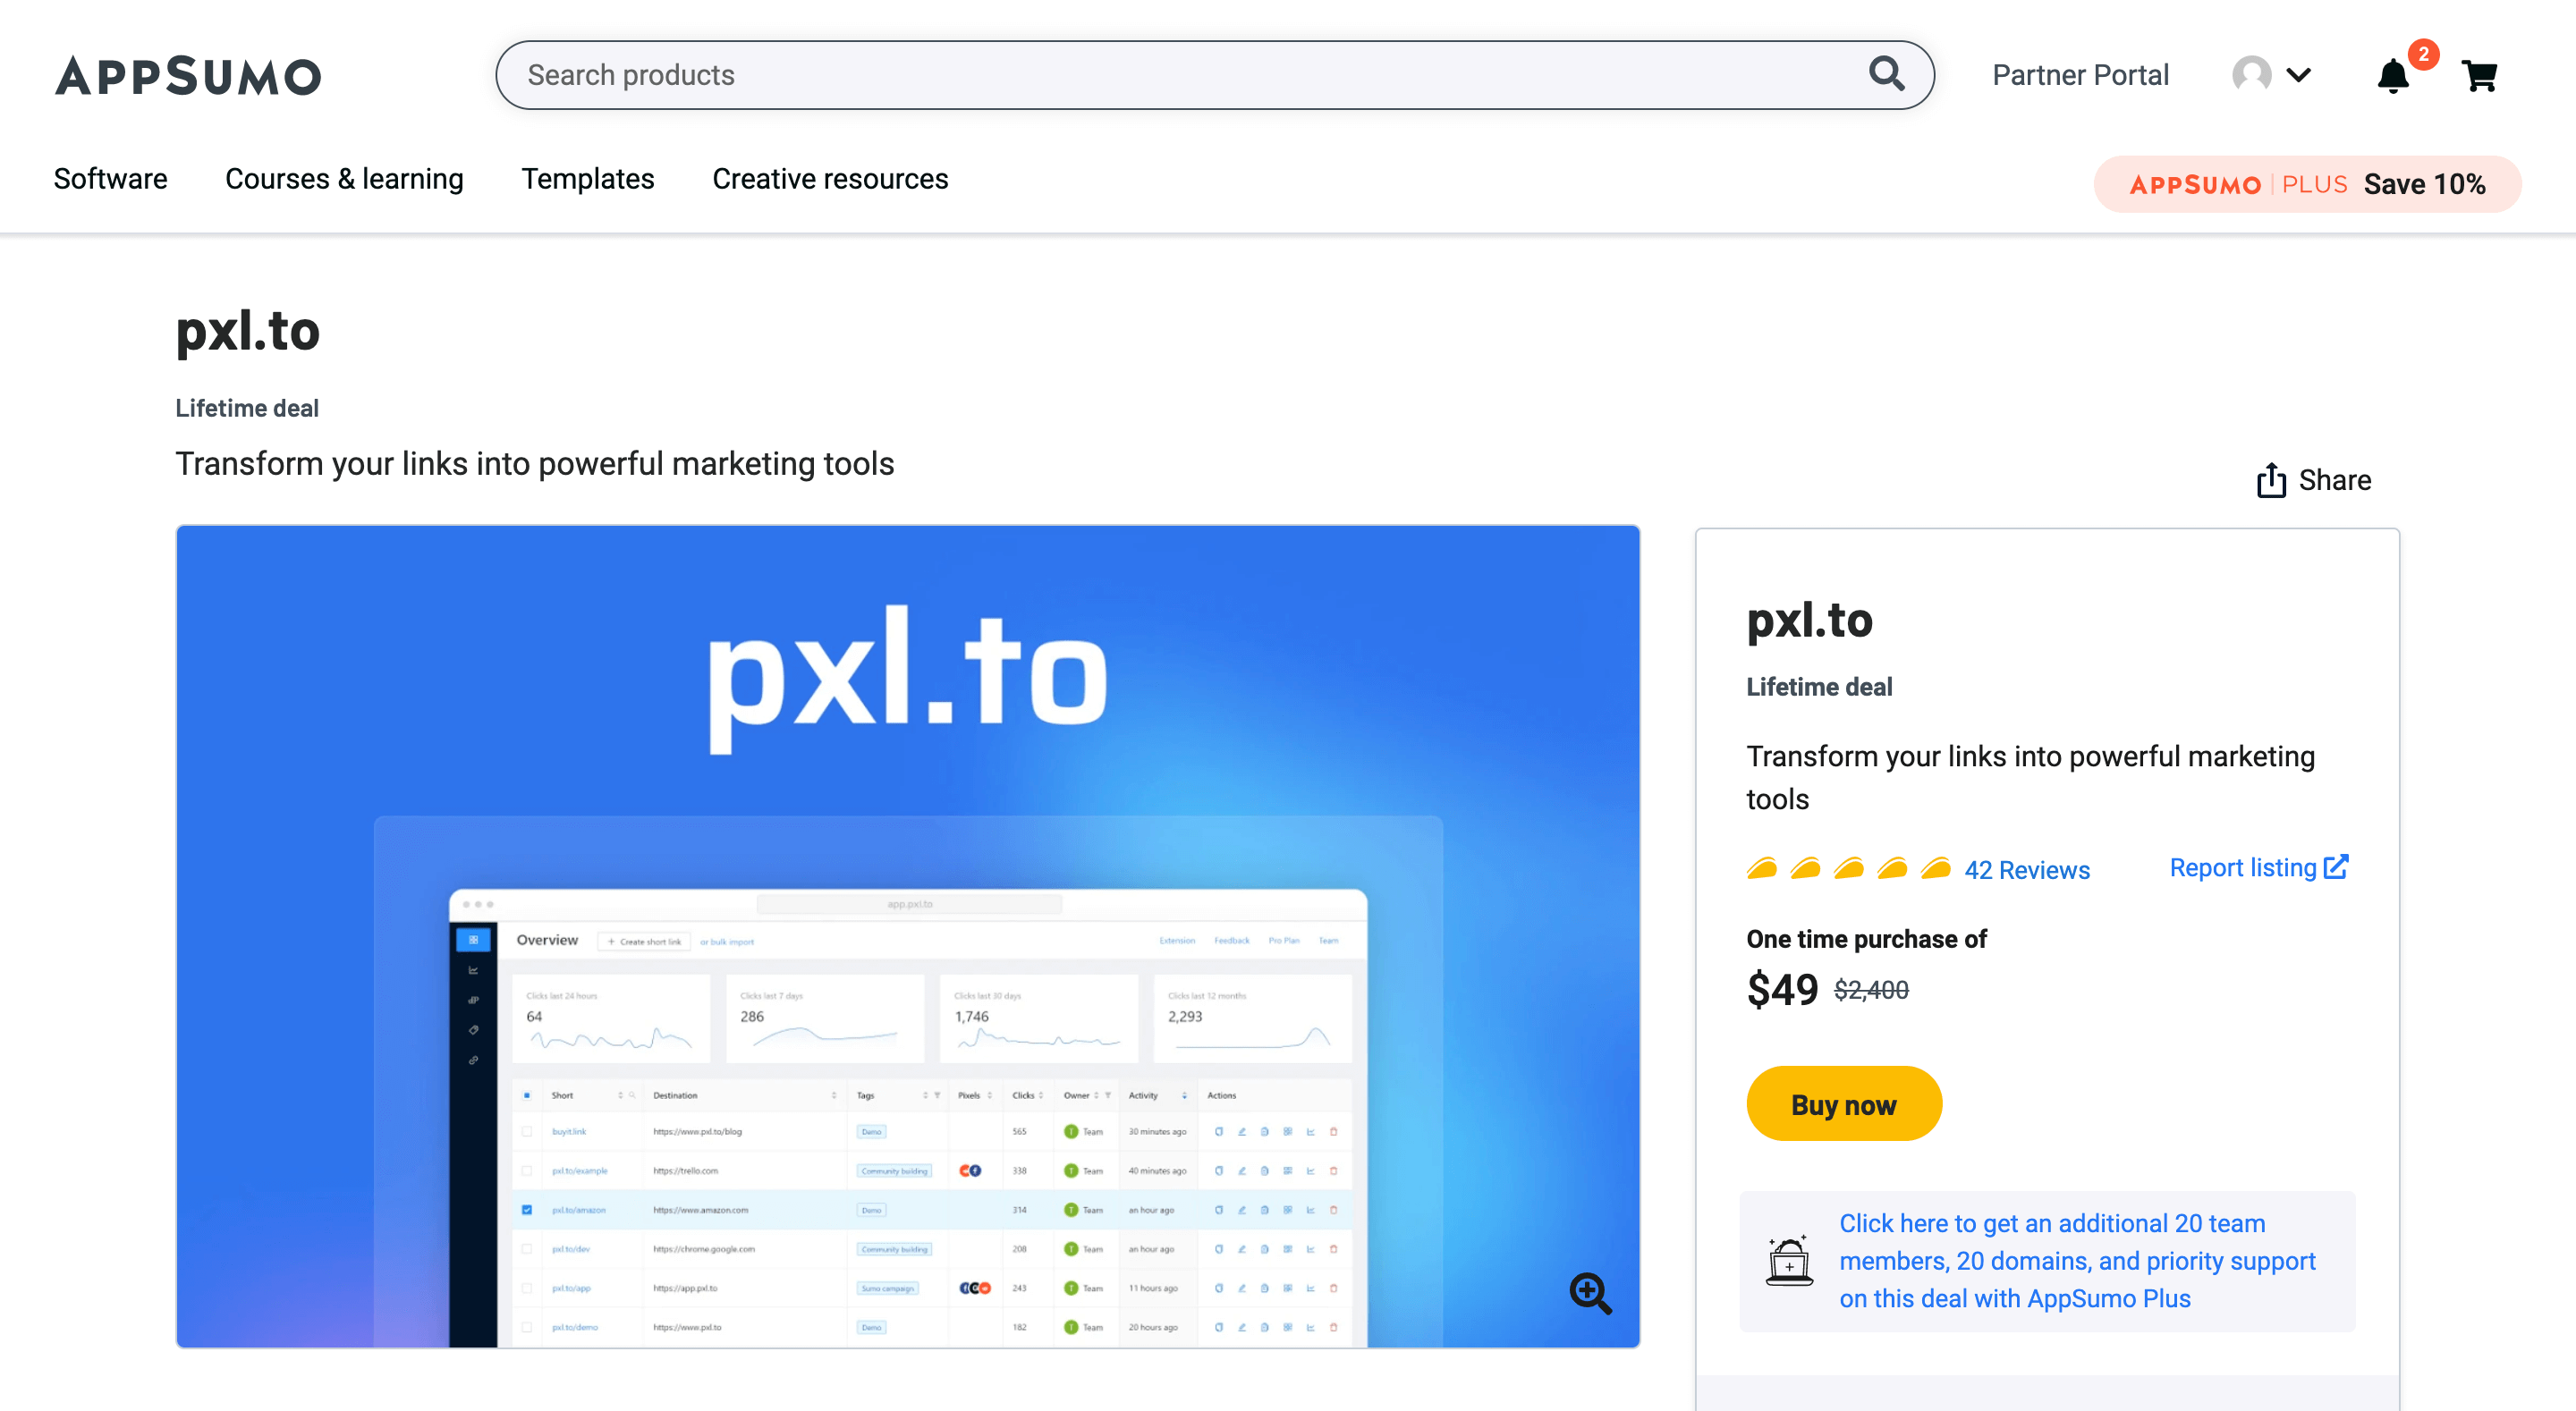 pxl.to lifetime deal